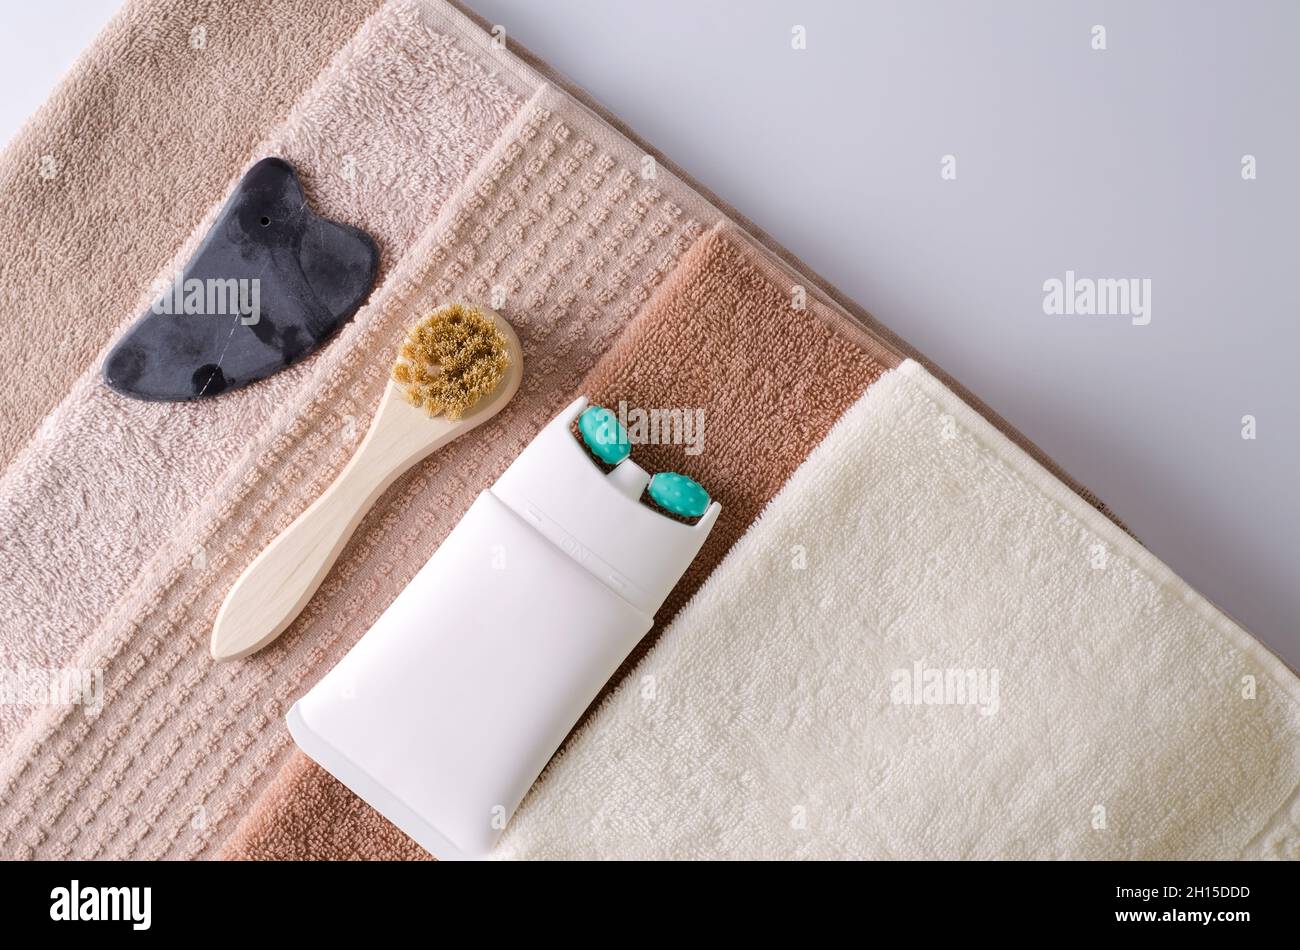 Lifting cream in a tube with a massage roller nozzle, brush made of natural bristles and gouache made of natural stone for a stack of towels, accessor Stock Photo